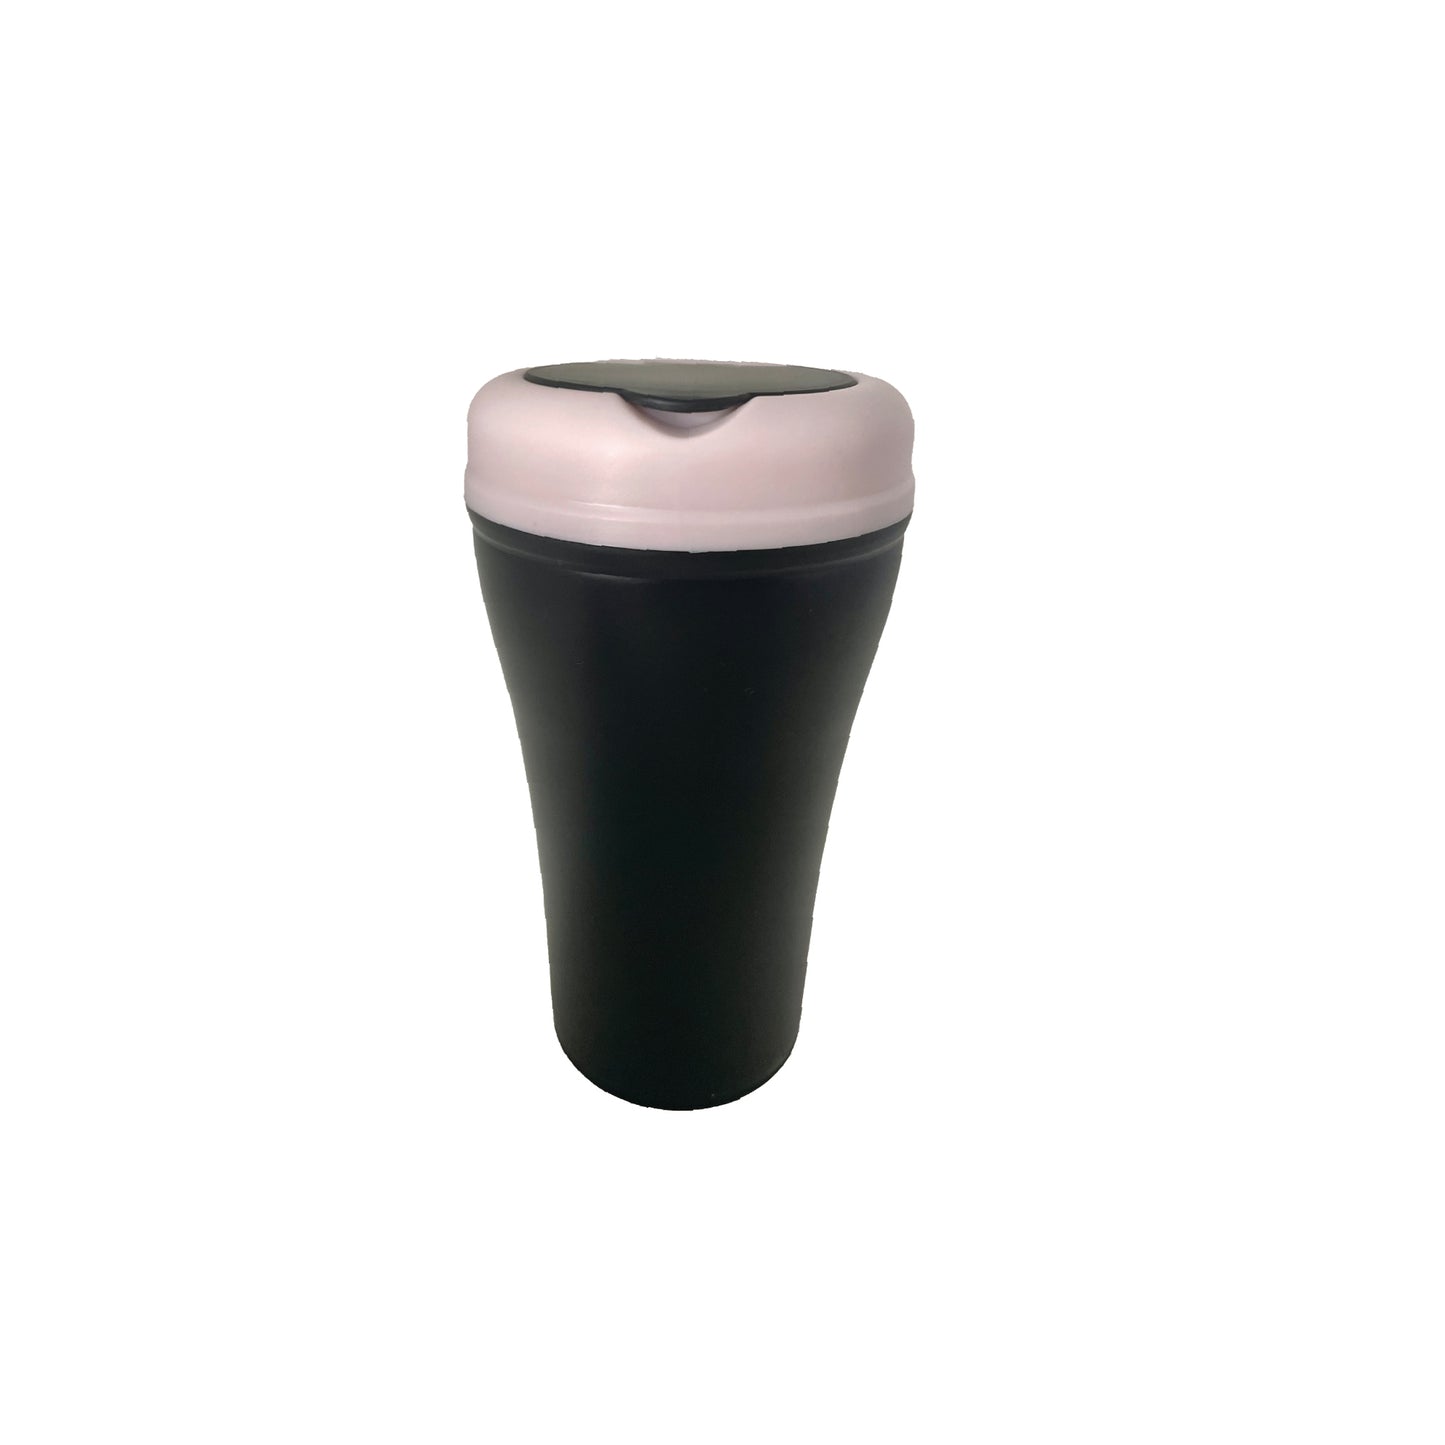 Mini Car Trash Can with Lid, Automotive Cup Holder Mini Vehicle Garbage Can Trash Bin for Car. Fit in Side Door Cup Holder for Receipts